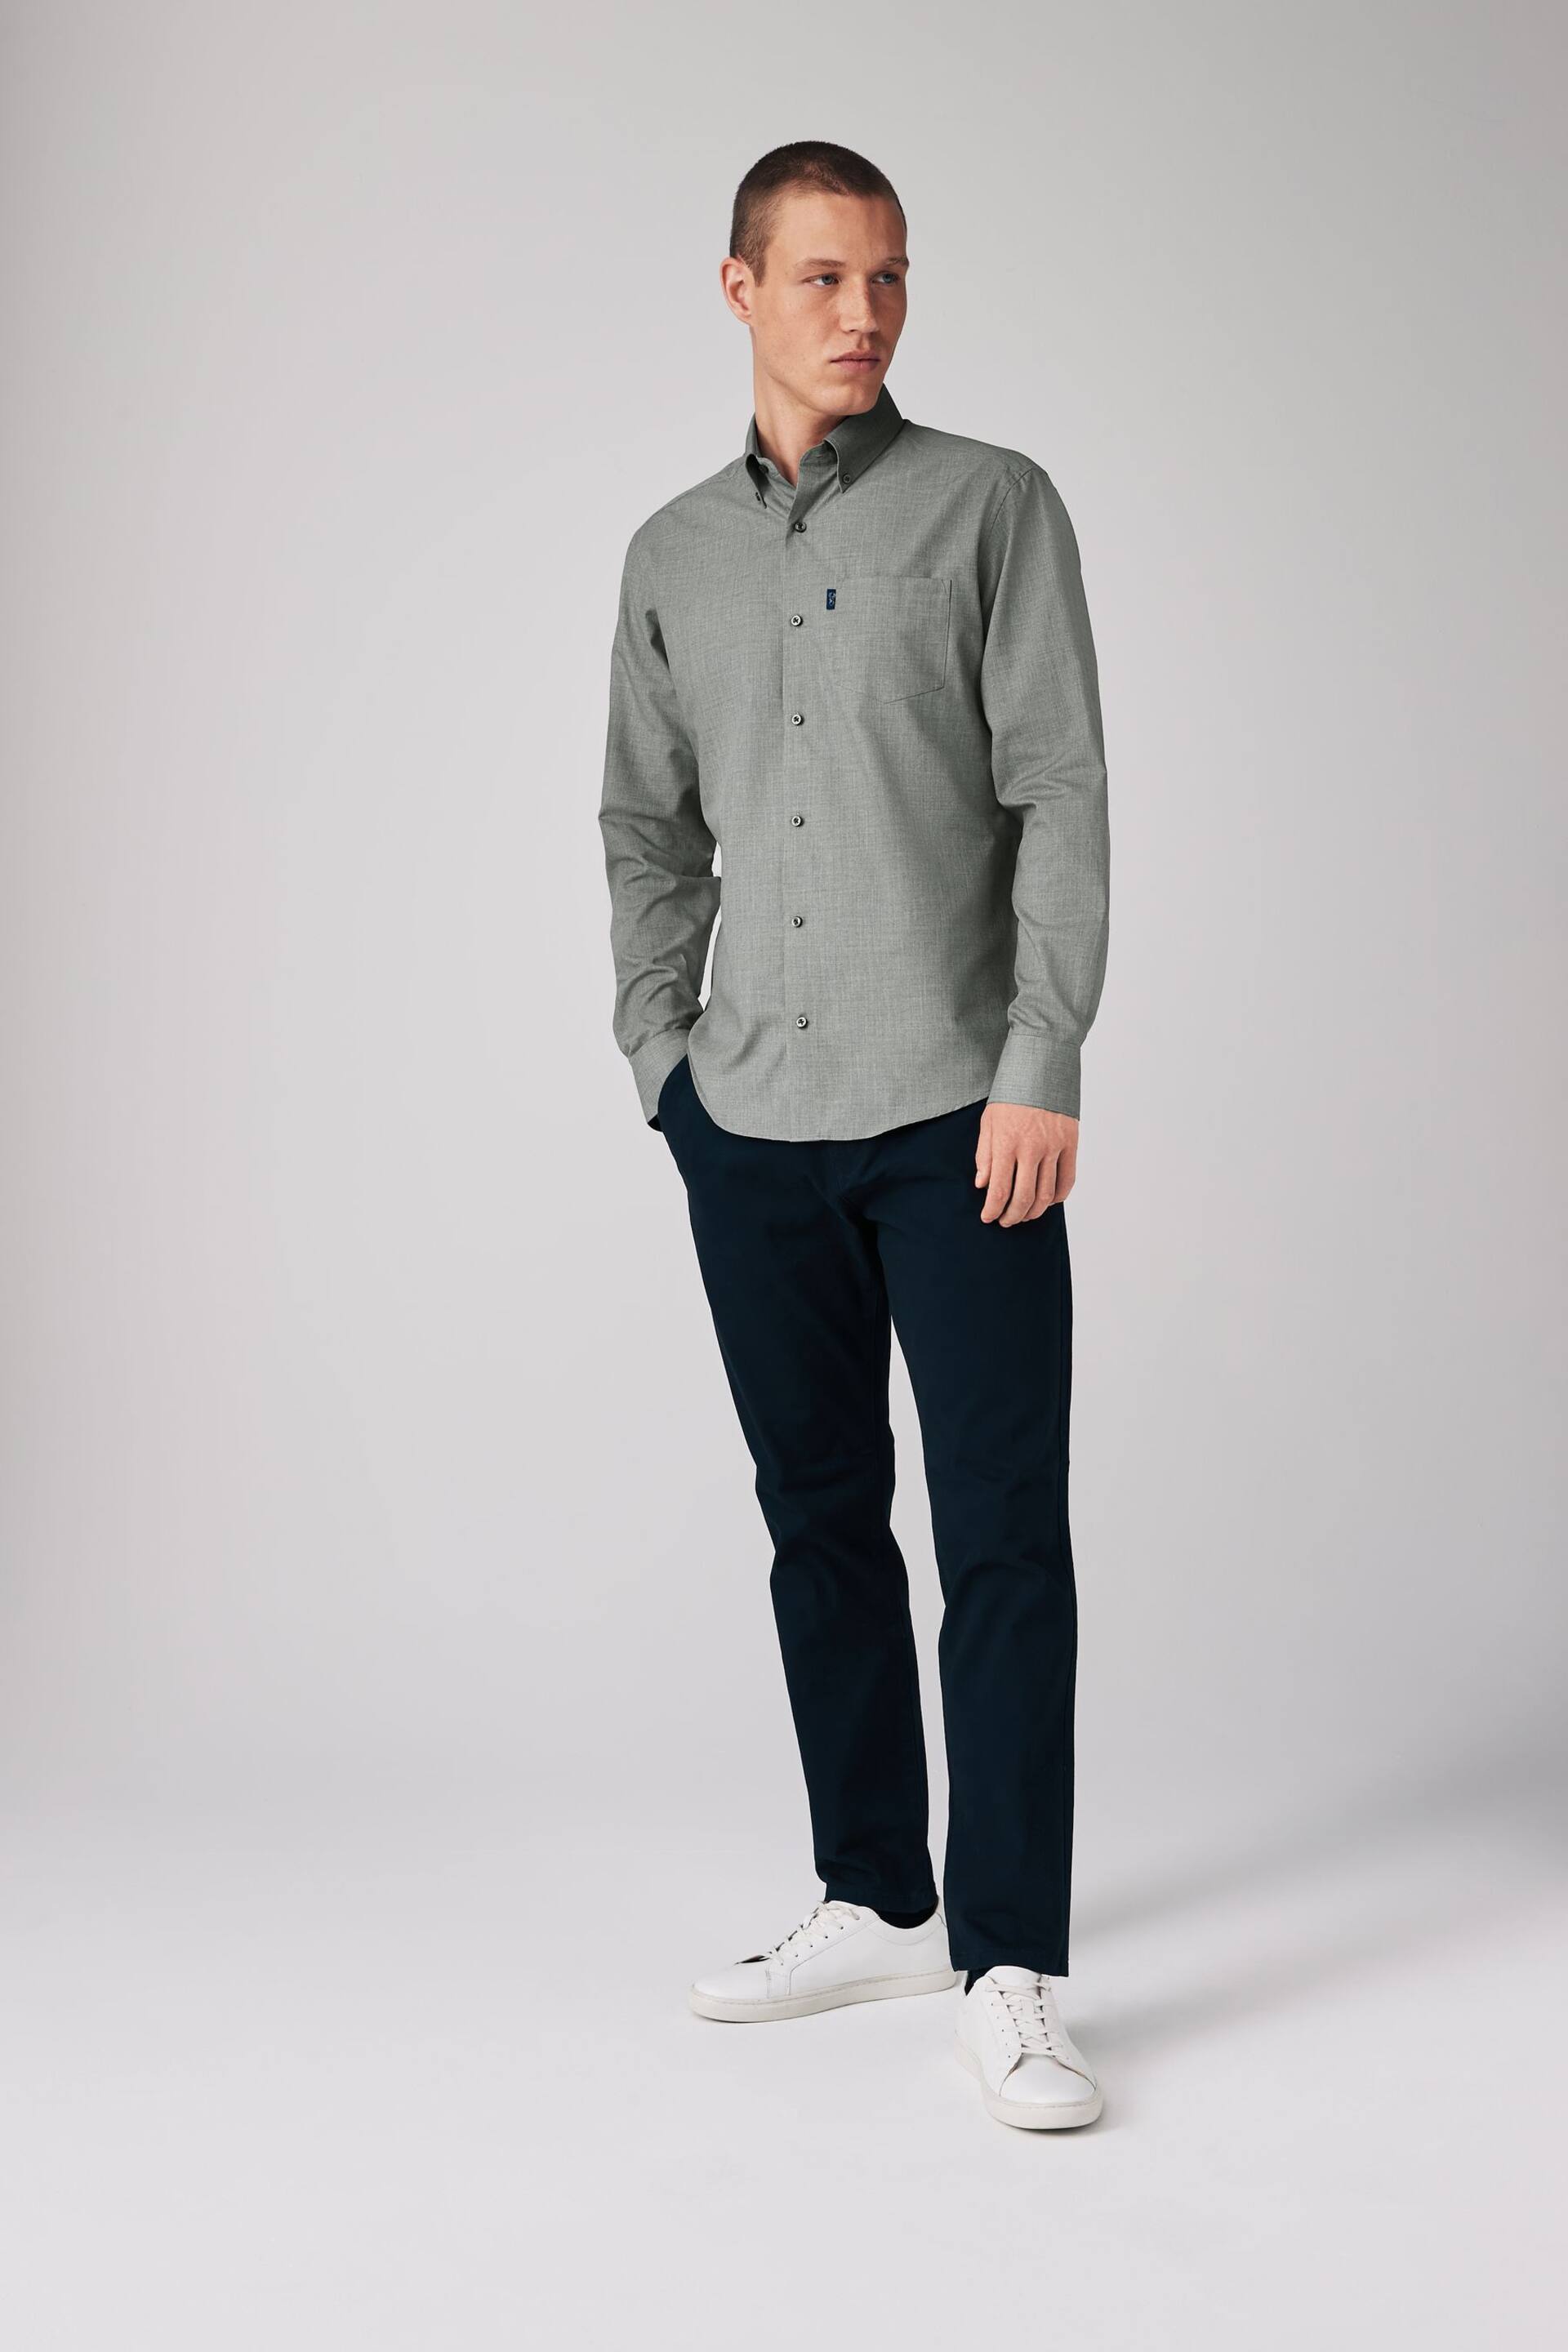 Grey Marl Regular Fit Easy Iron Button Down Oxford Shirt - Image 2 of 6